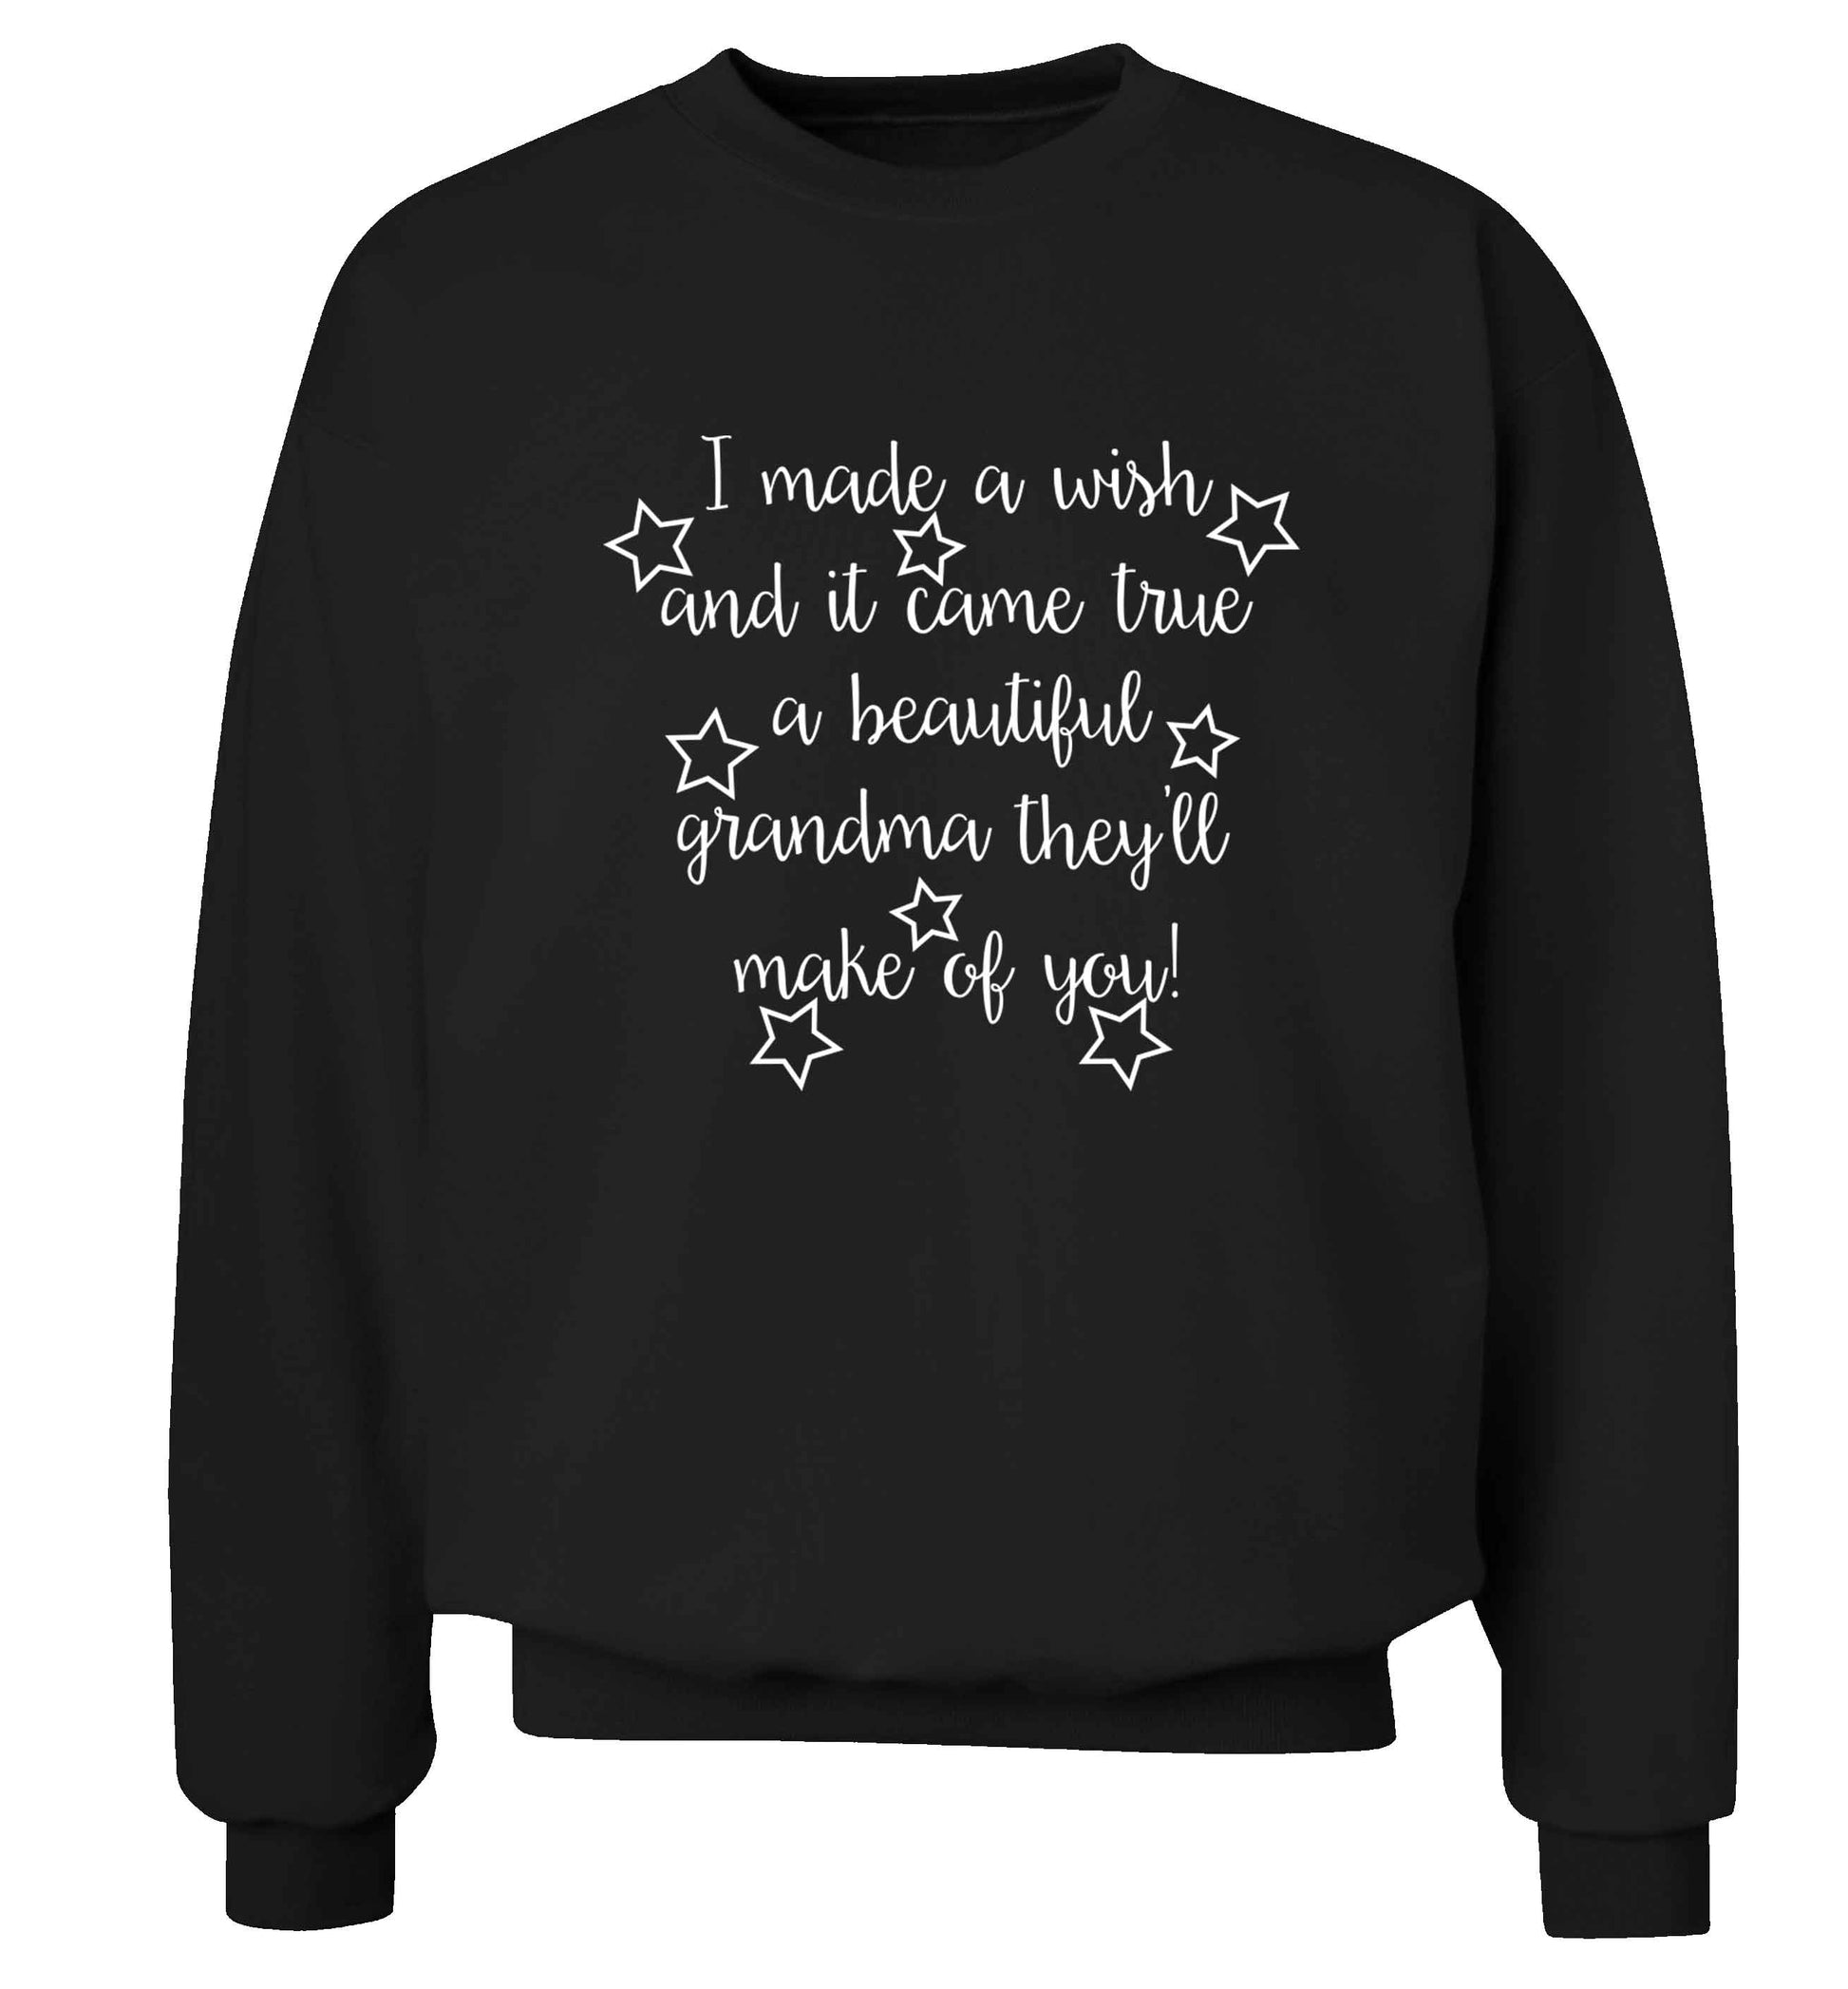 I made a wish and it came true a beautiful grandma they'll make of you! Adult's unisex black Sweater 2XL